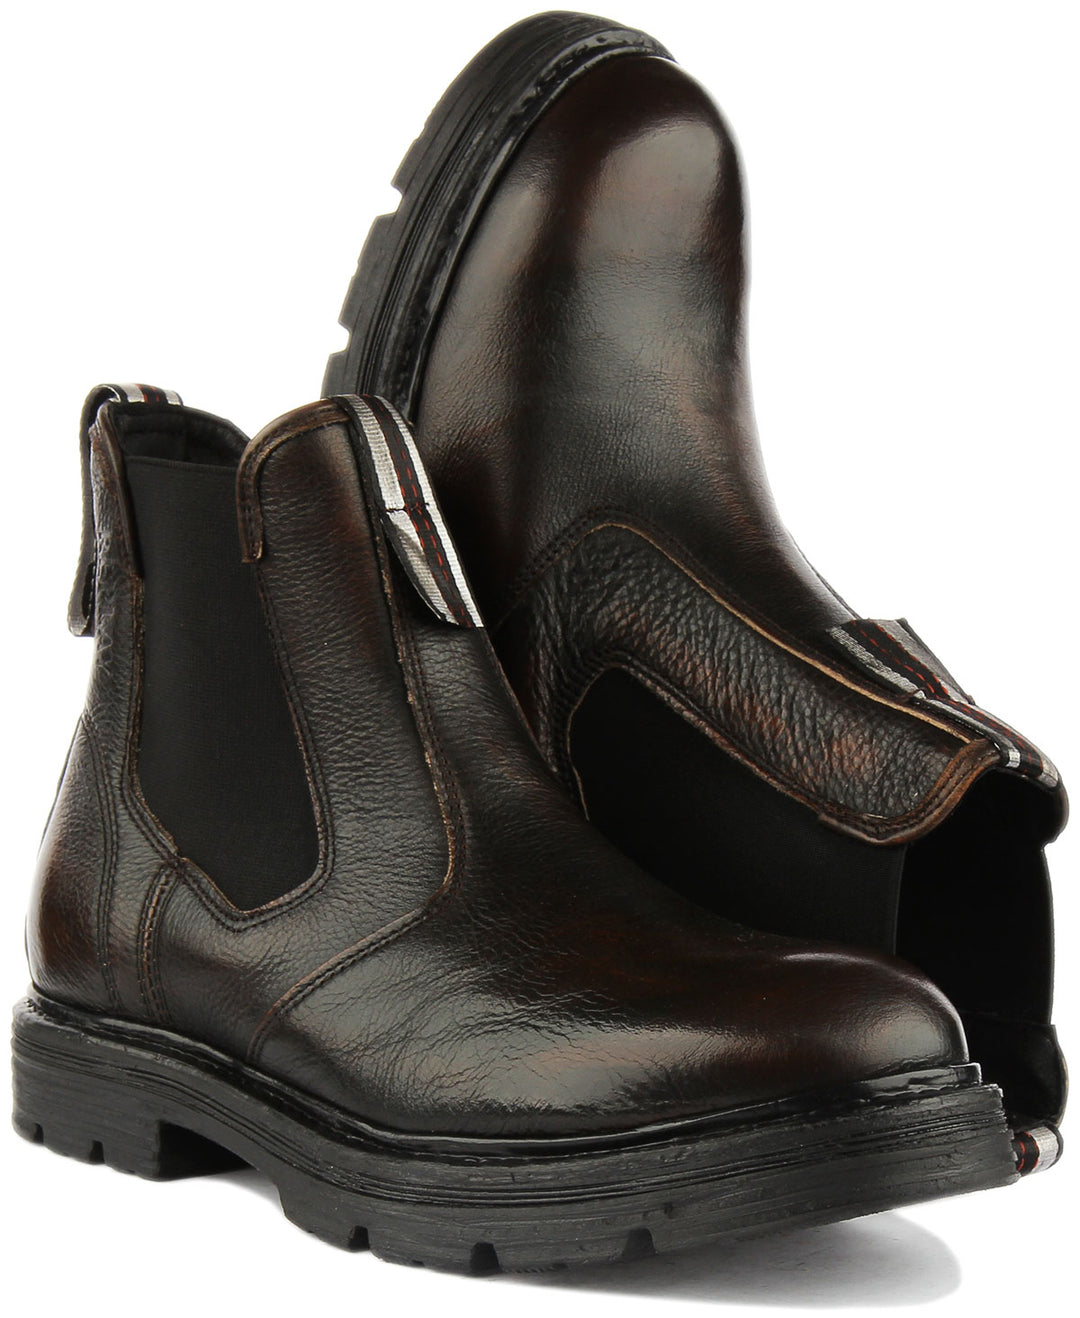 Replay Embry Chelsea Boots In Dark Brown For Men